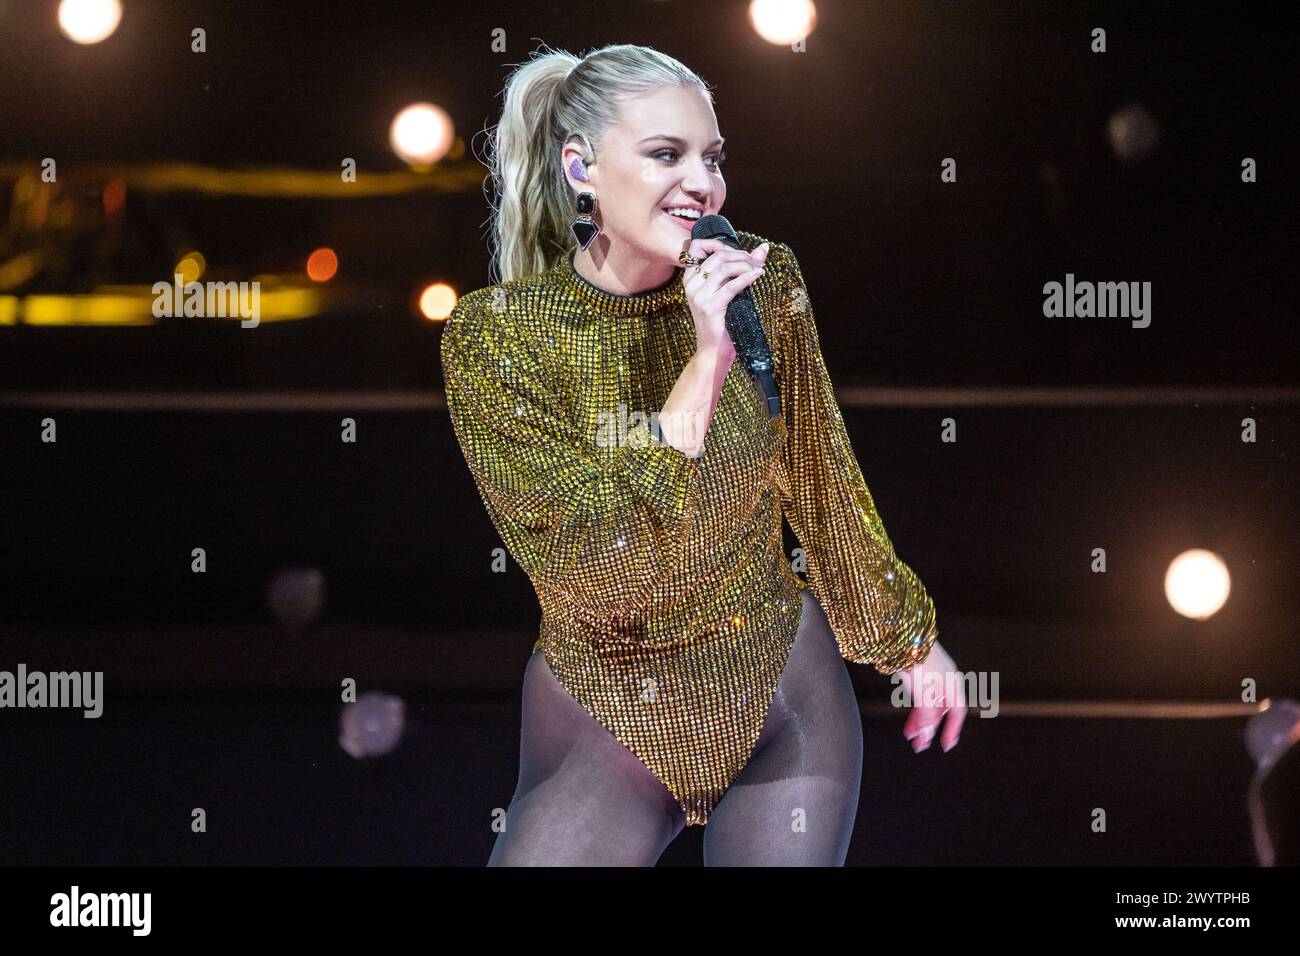 AUSTIN, TEXAS - APRIL 07: In this image released on April 07, 2024, Kelsea Ballerini performs on the 2024 CMT Music Awards stage on April 3, 2024, at the University of Texas at Austin in Austin, Texas.  (Photo by Amy Price/ImageSPACE) Stock Photo